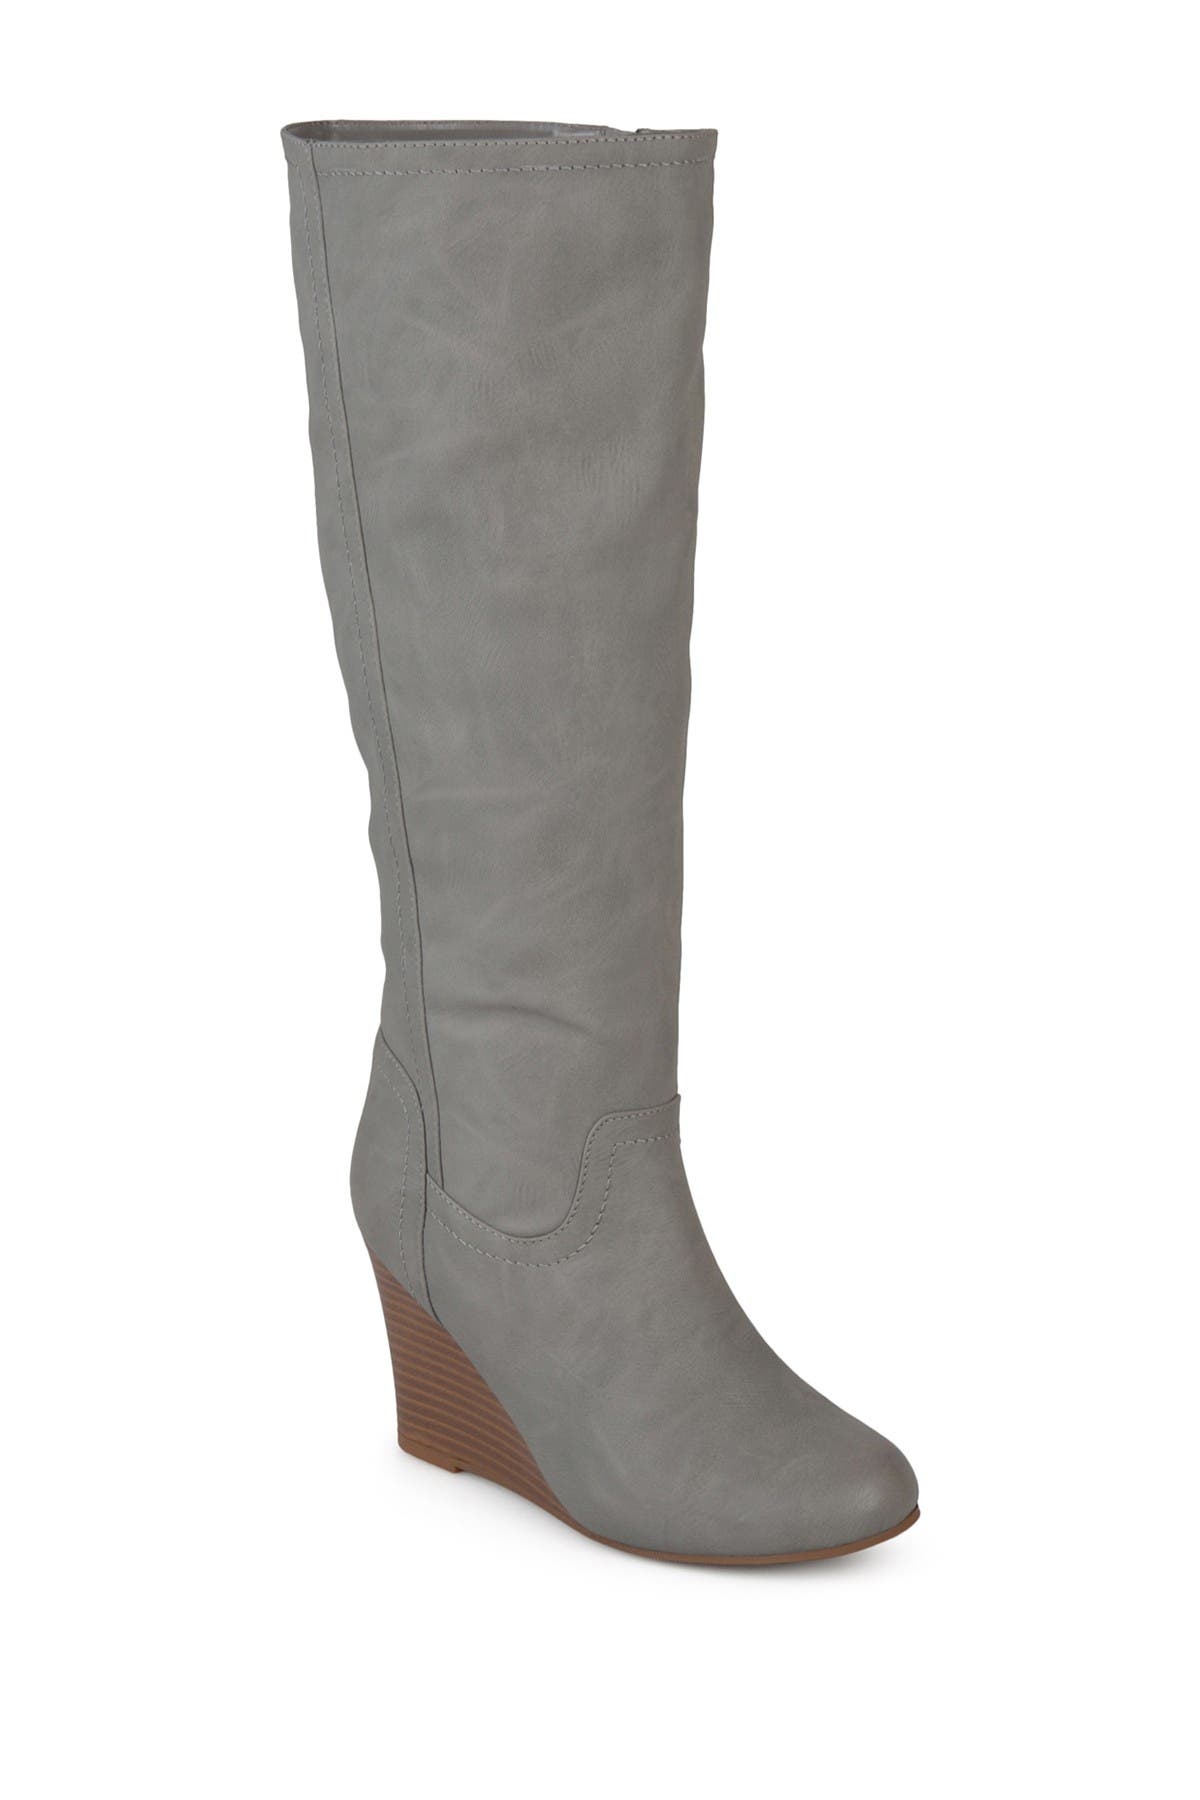 tall grey boots with heel